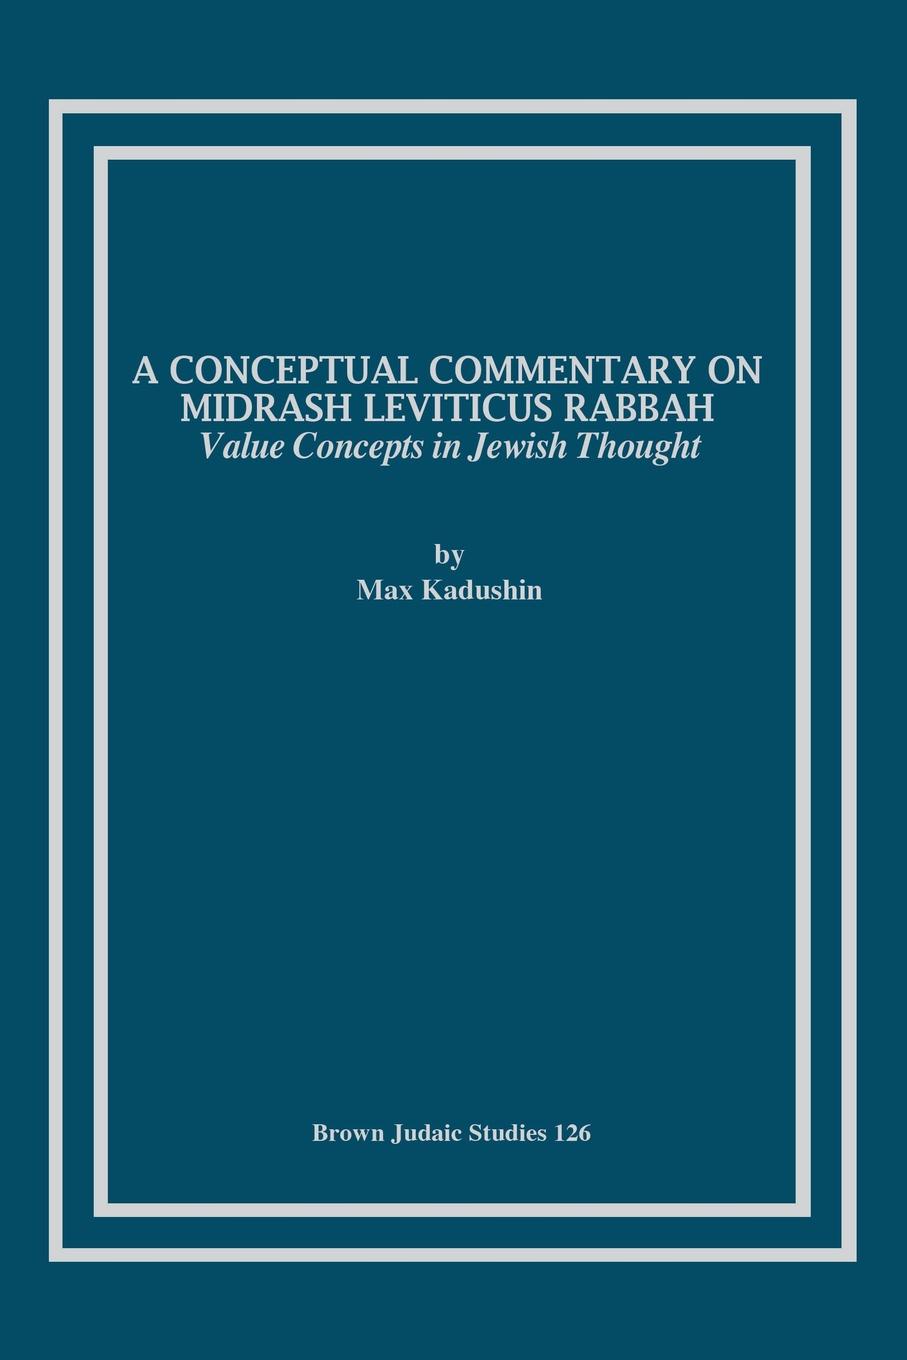 A Conceptual Commentary on Midrash Leviticus Rabbah. Value Concepts in Jewish Thought